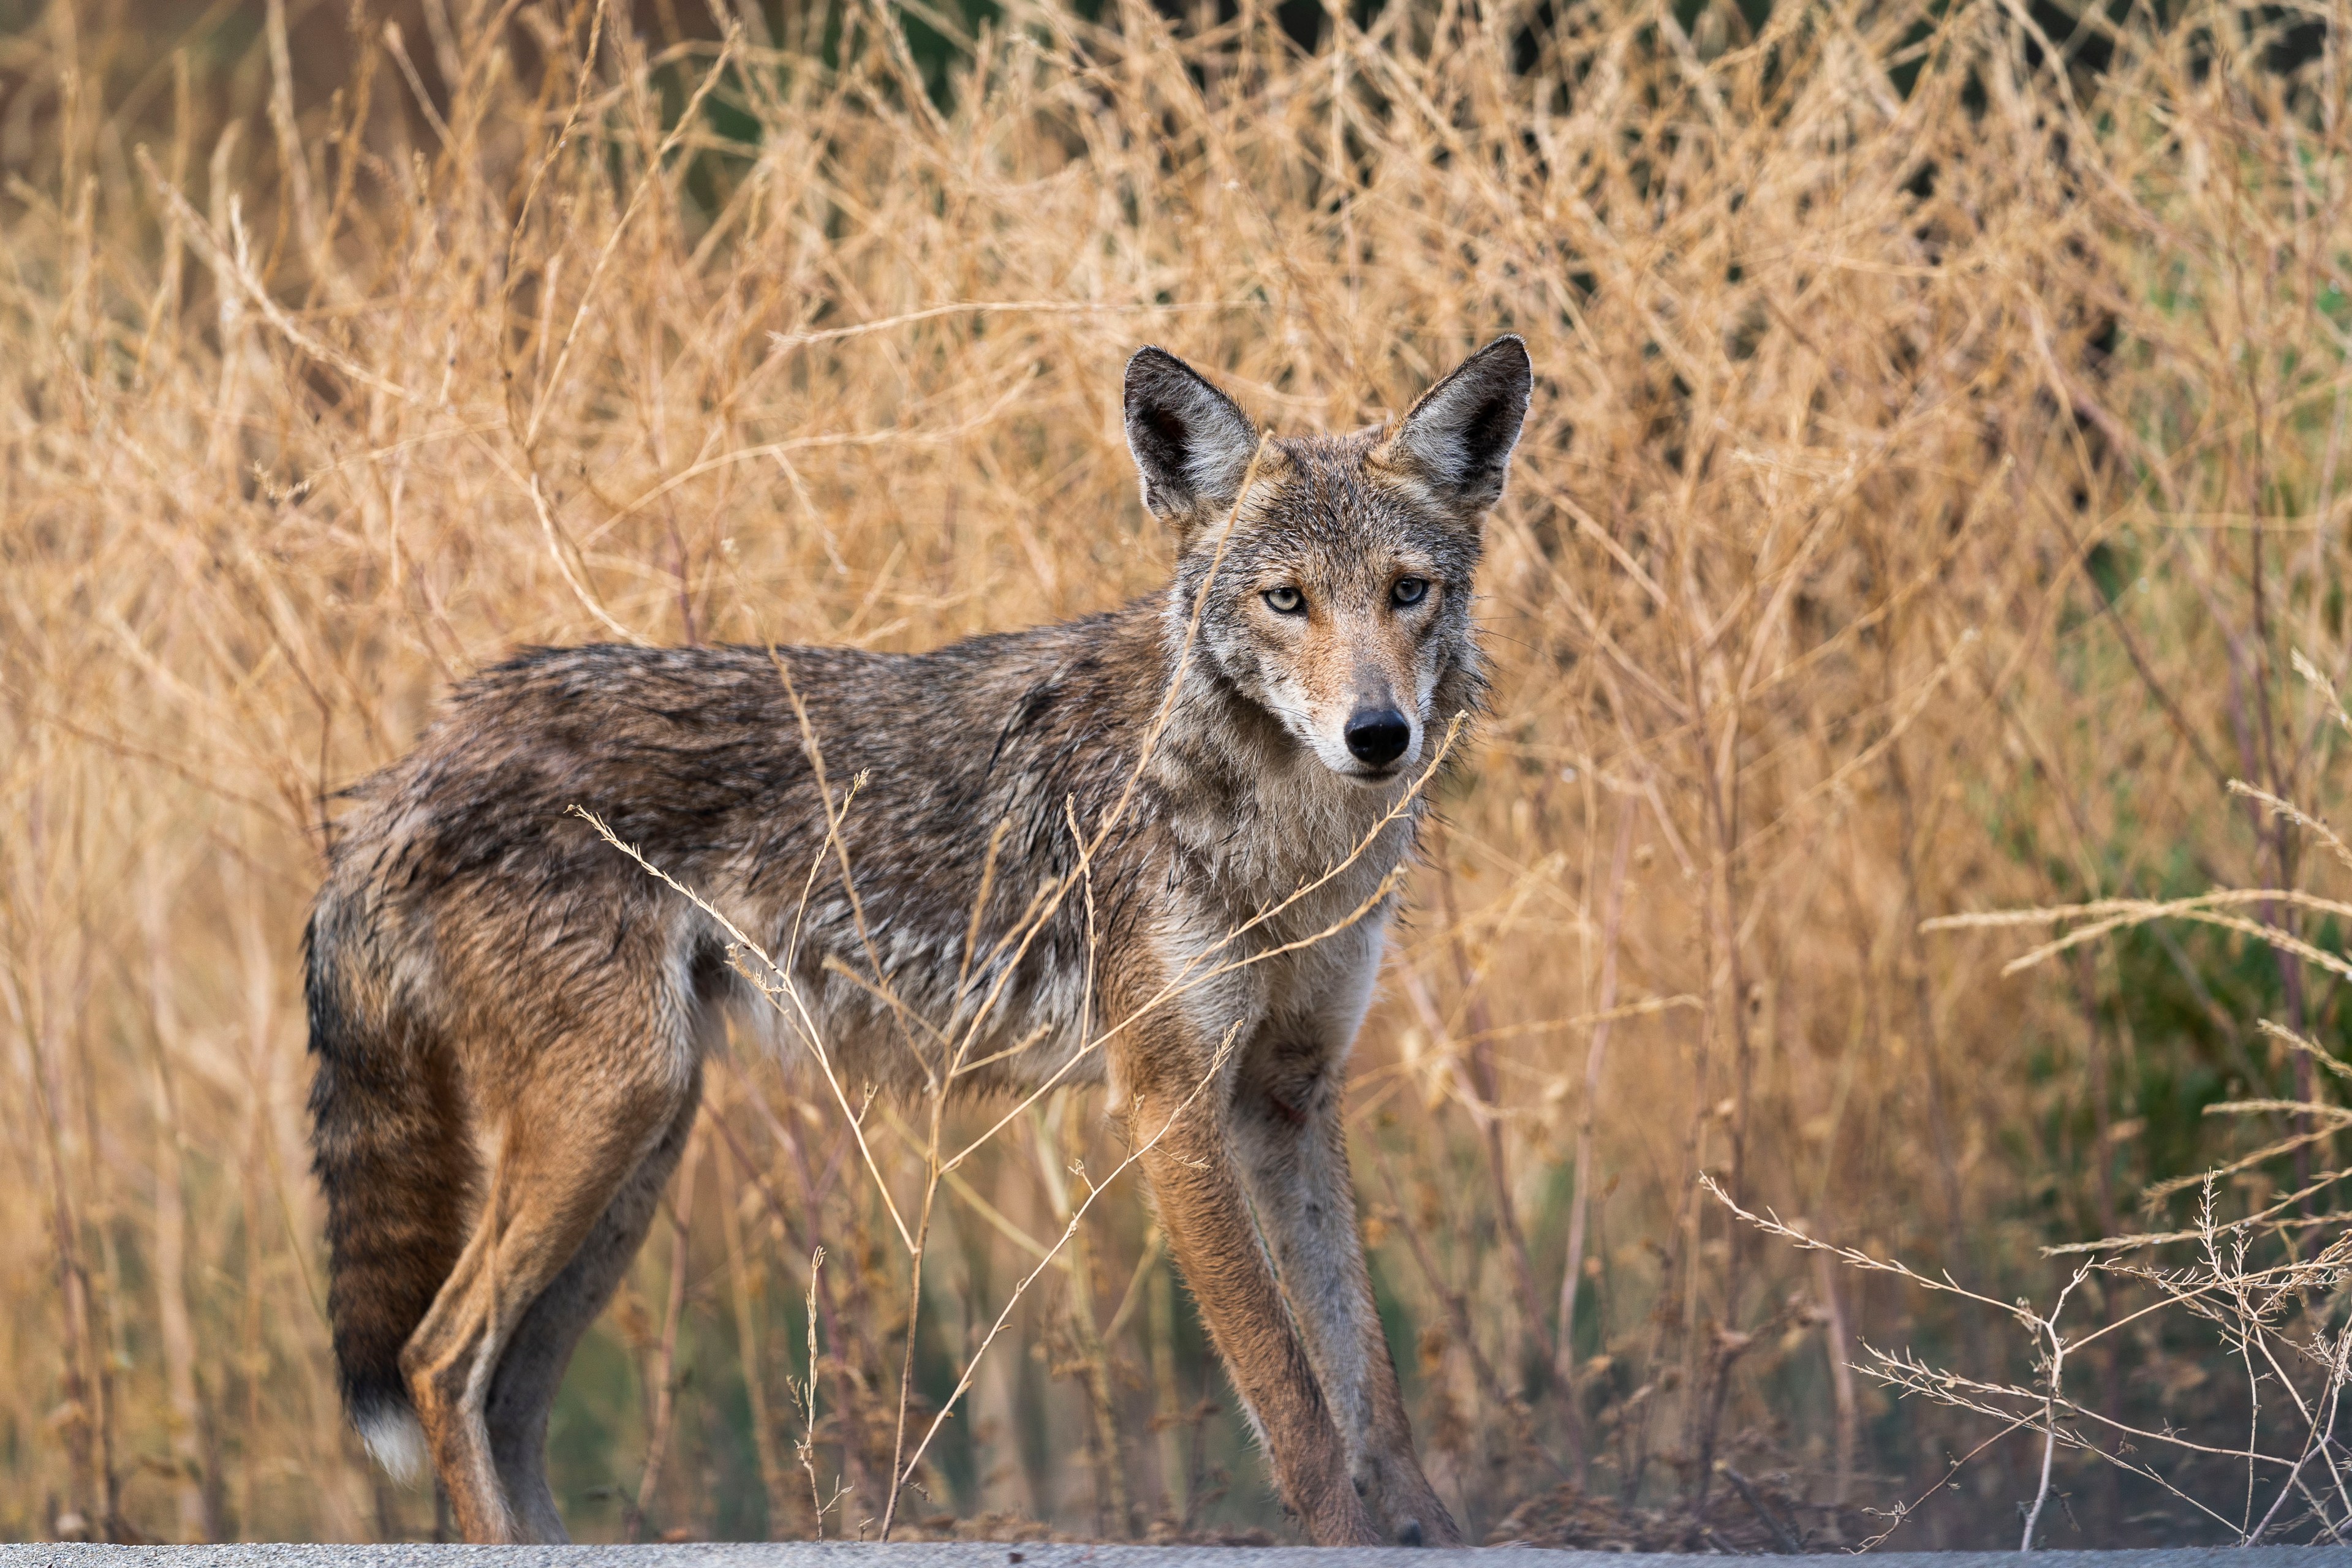 A coyote stands alert among dry, tall grasses. It has a thick, brown and grey fur coat, large pointed ears, and is gazing intently forward.